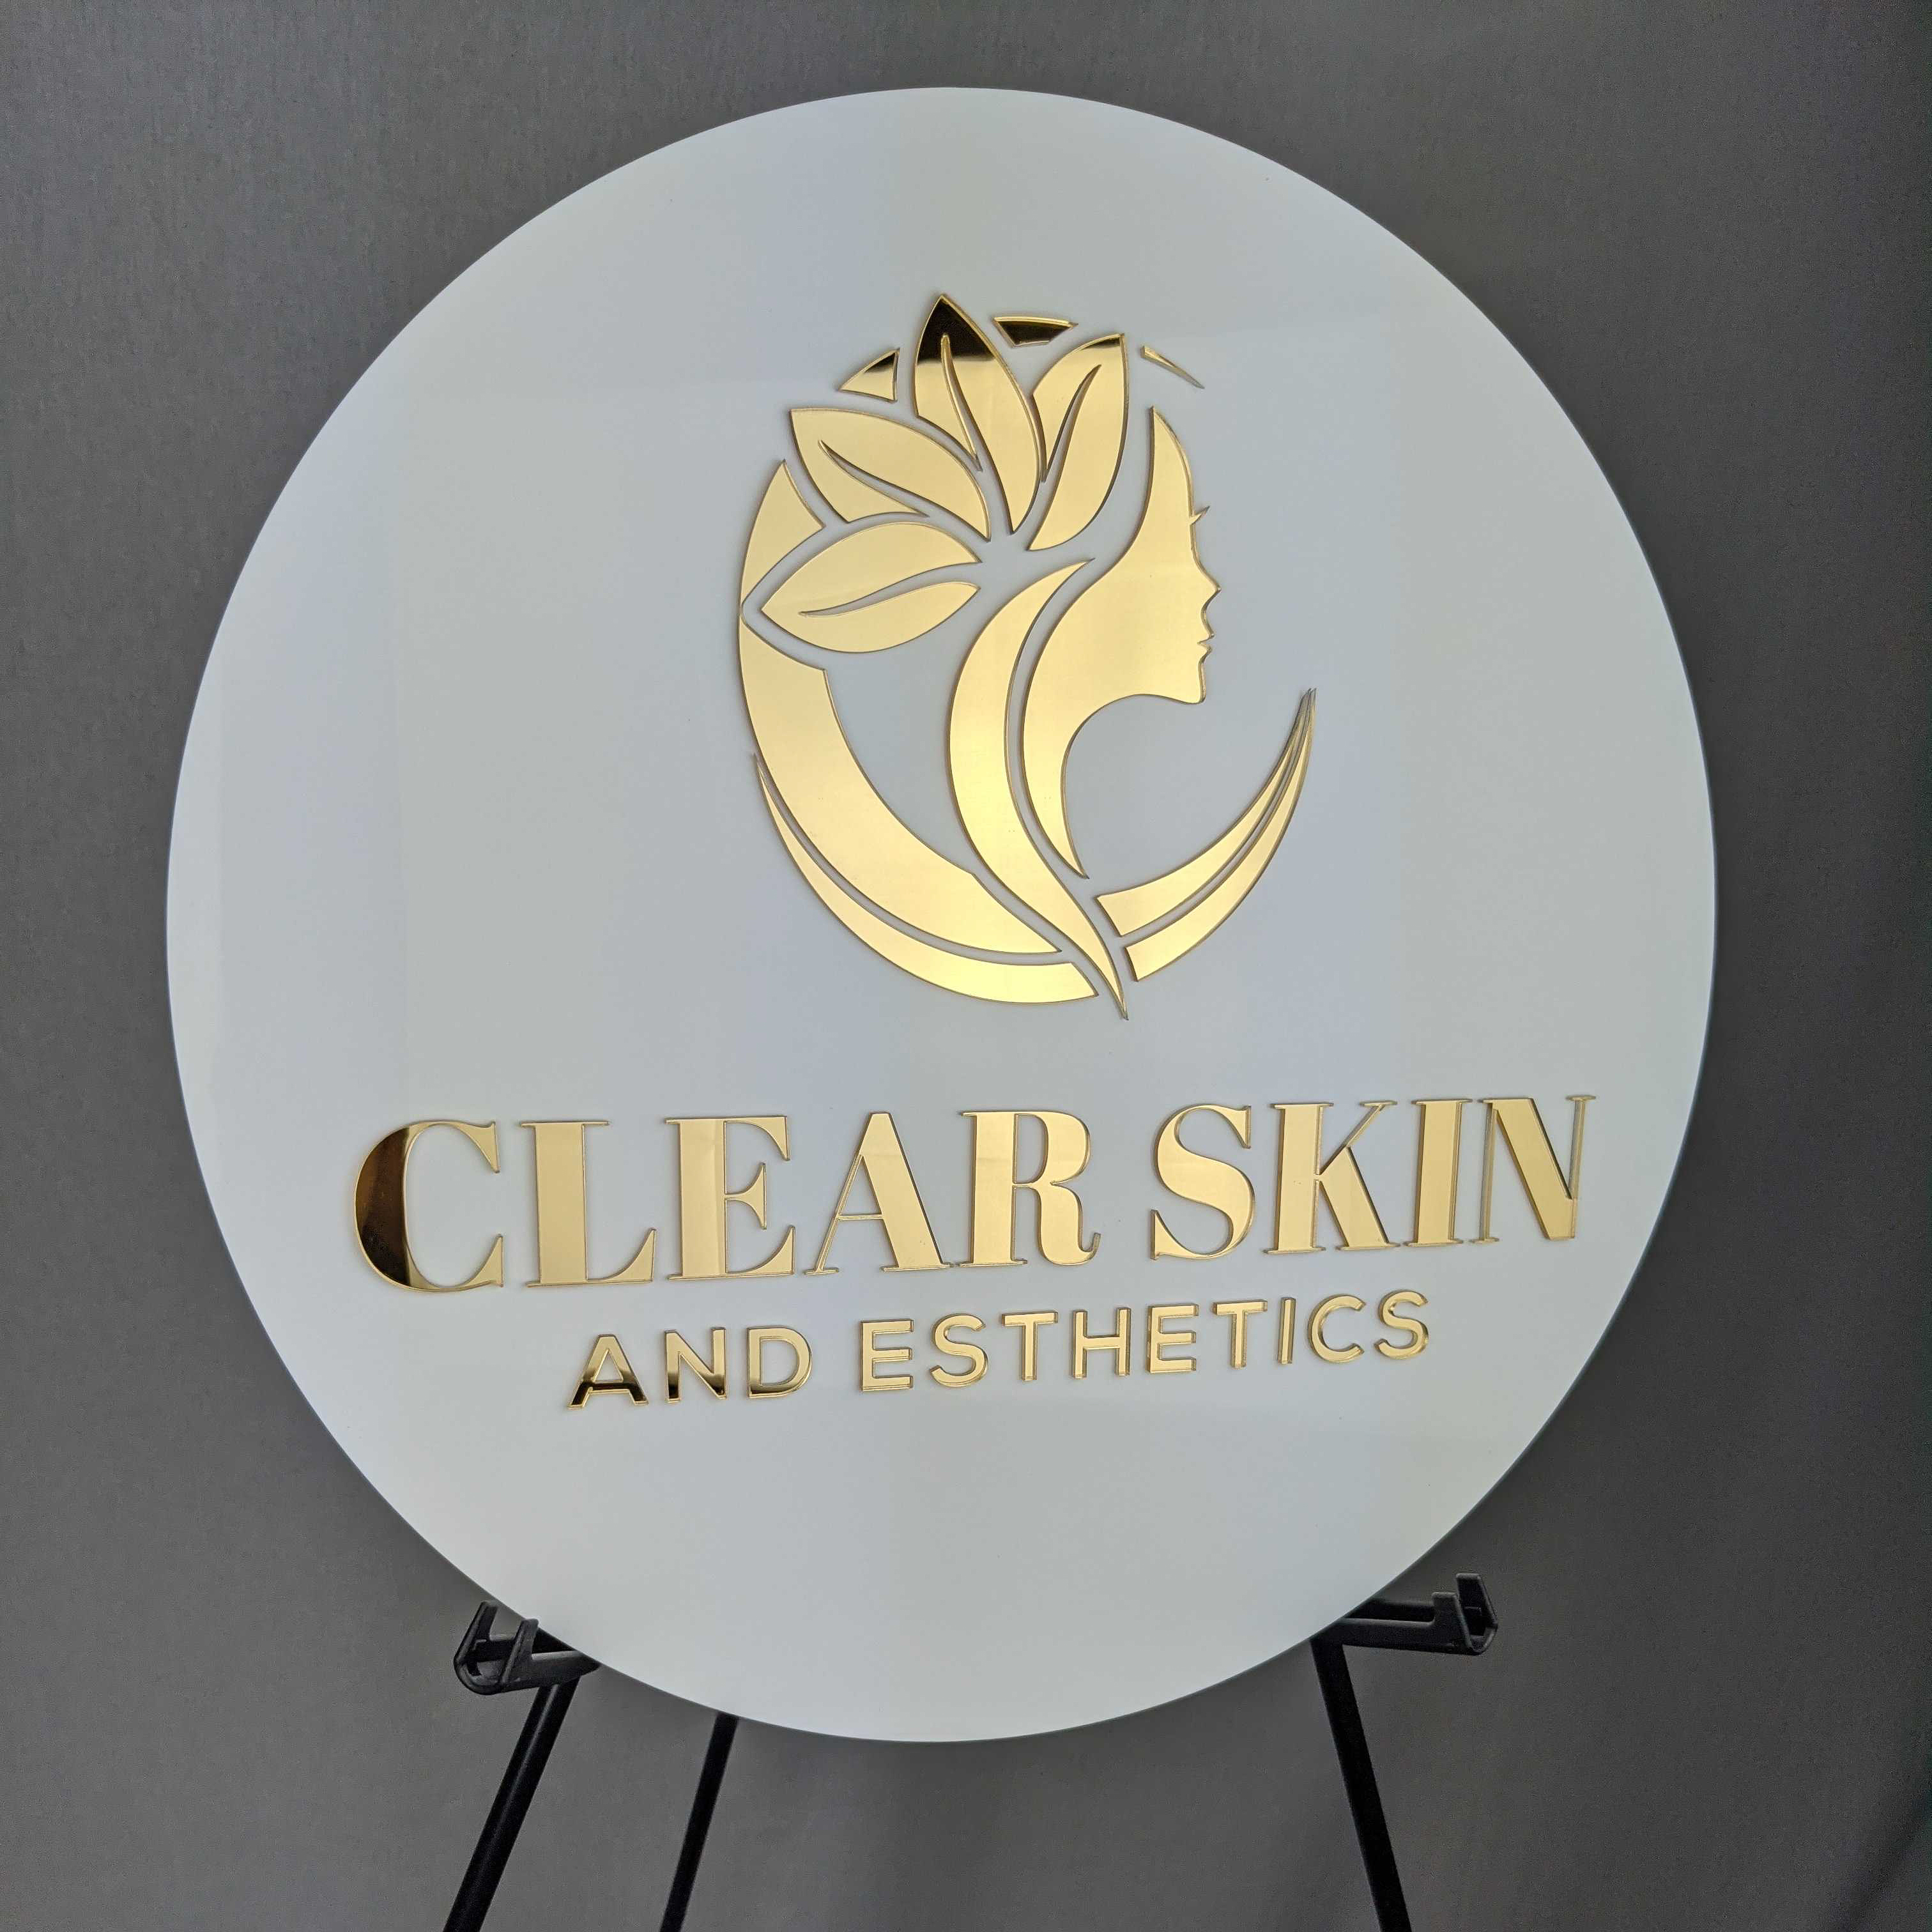  Clear Skin and Esthetics round sign